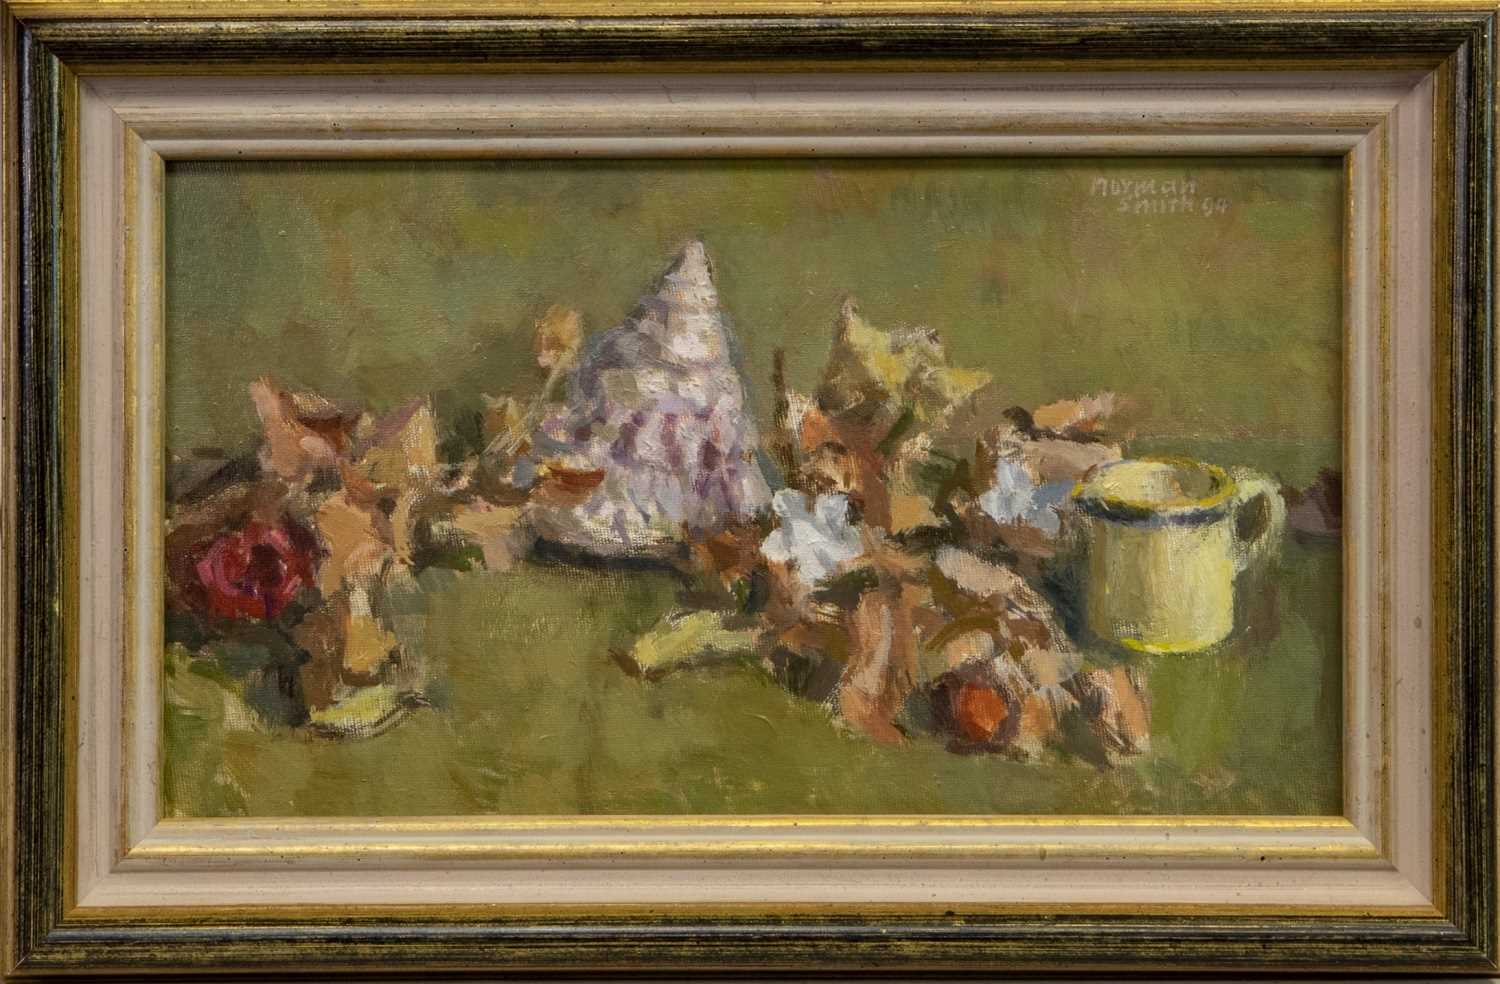 Lot 417 - STILL LIFE WITH SHELLS, FLOWERS AND MUG, AN OIL BY NORMAN SMITH